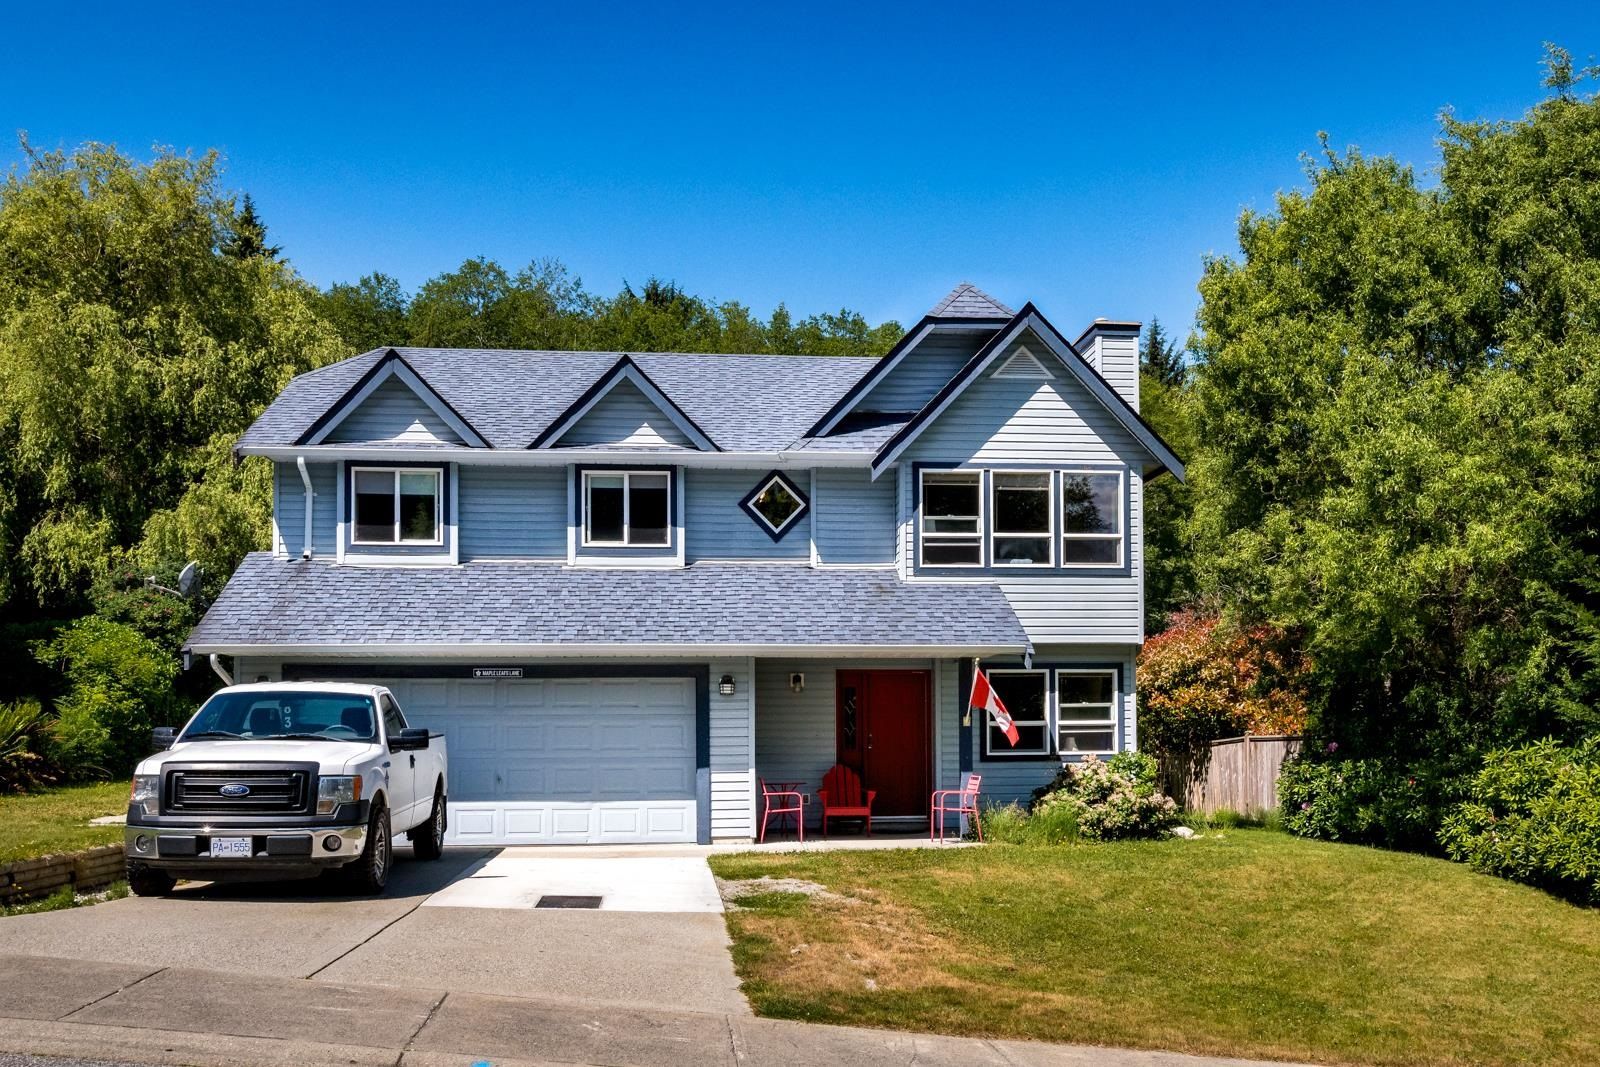 View our listing at 5833 HERON PL in Sechelt